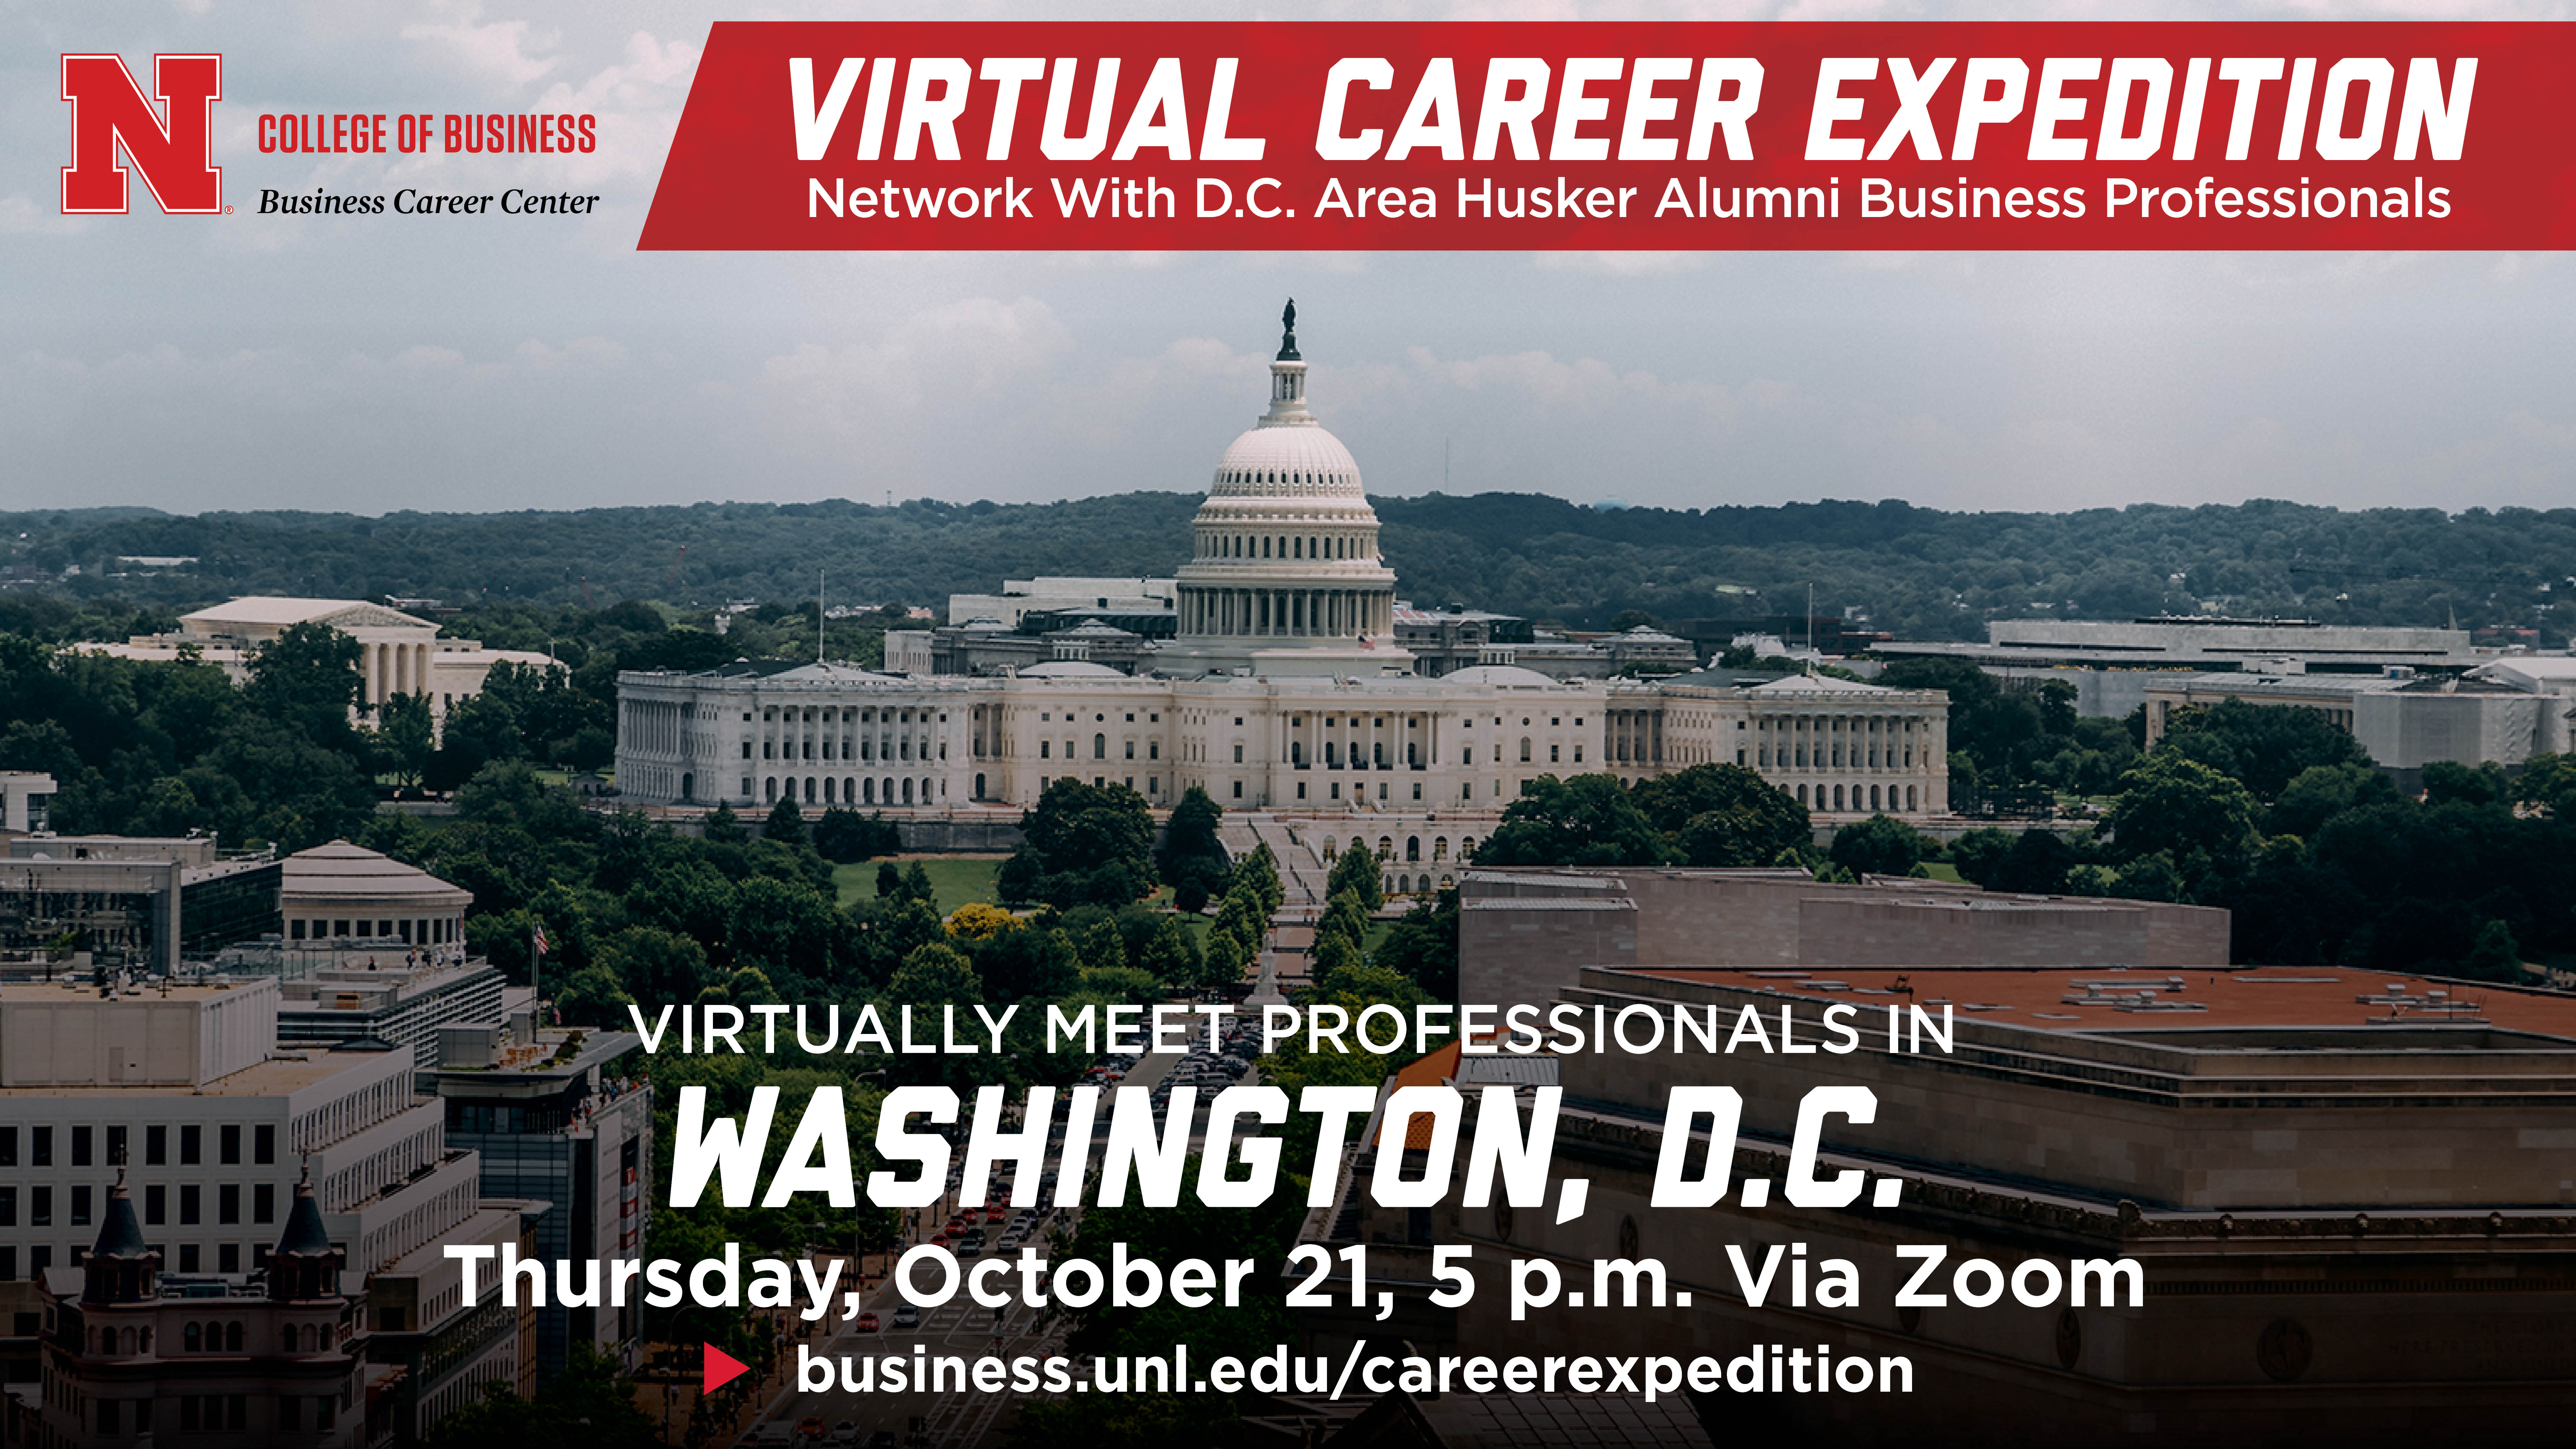 Network with D.C. Area Alumni